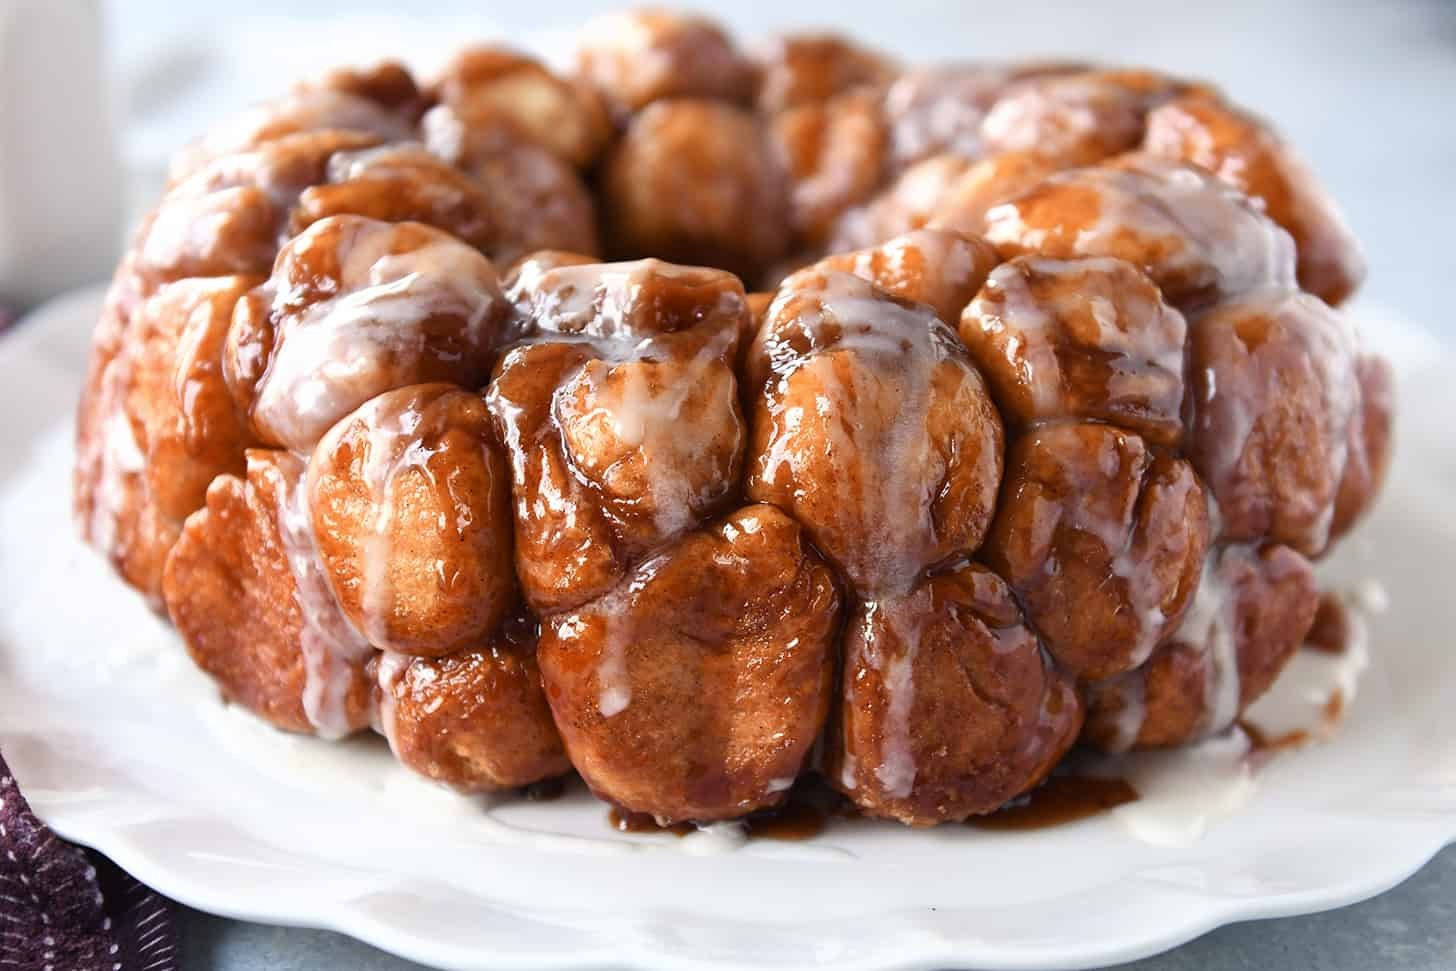 How to Make Pizookie Monkey Bread in the Air Fryer